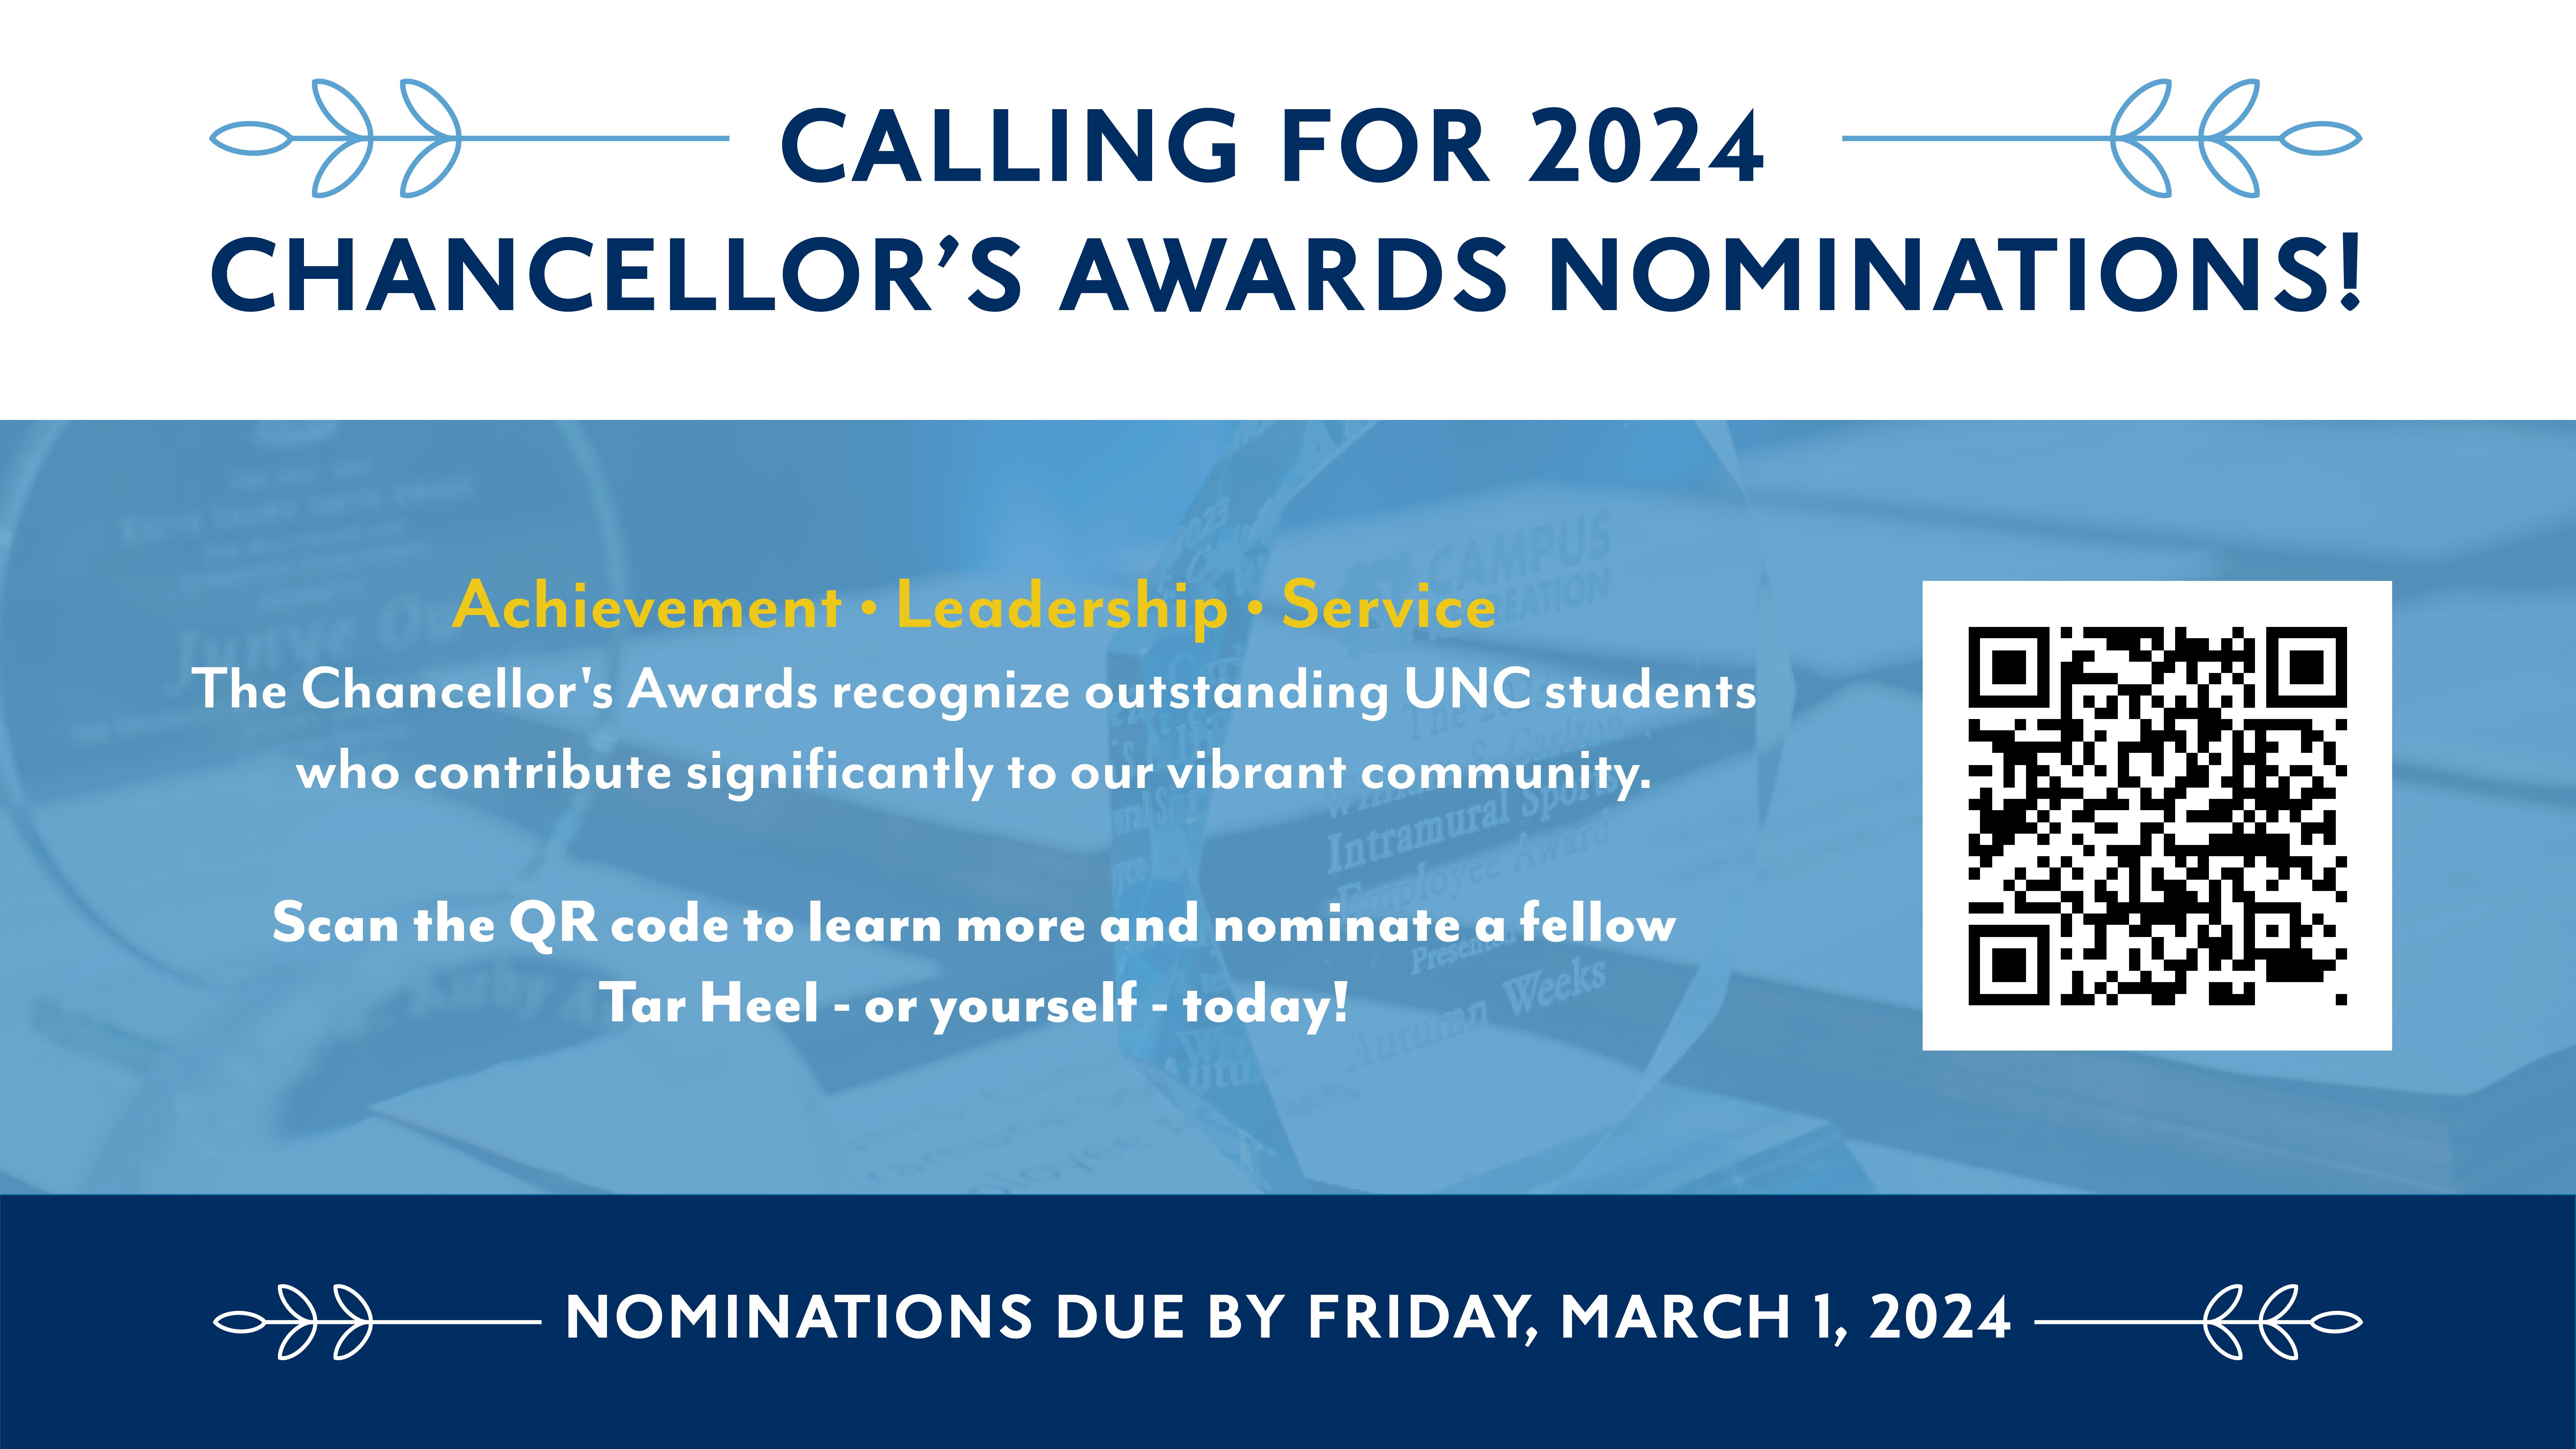 Nominations for the 2024 Chancellor's Awards from now until March 1st.